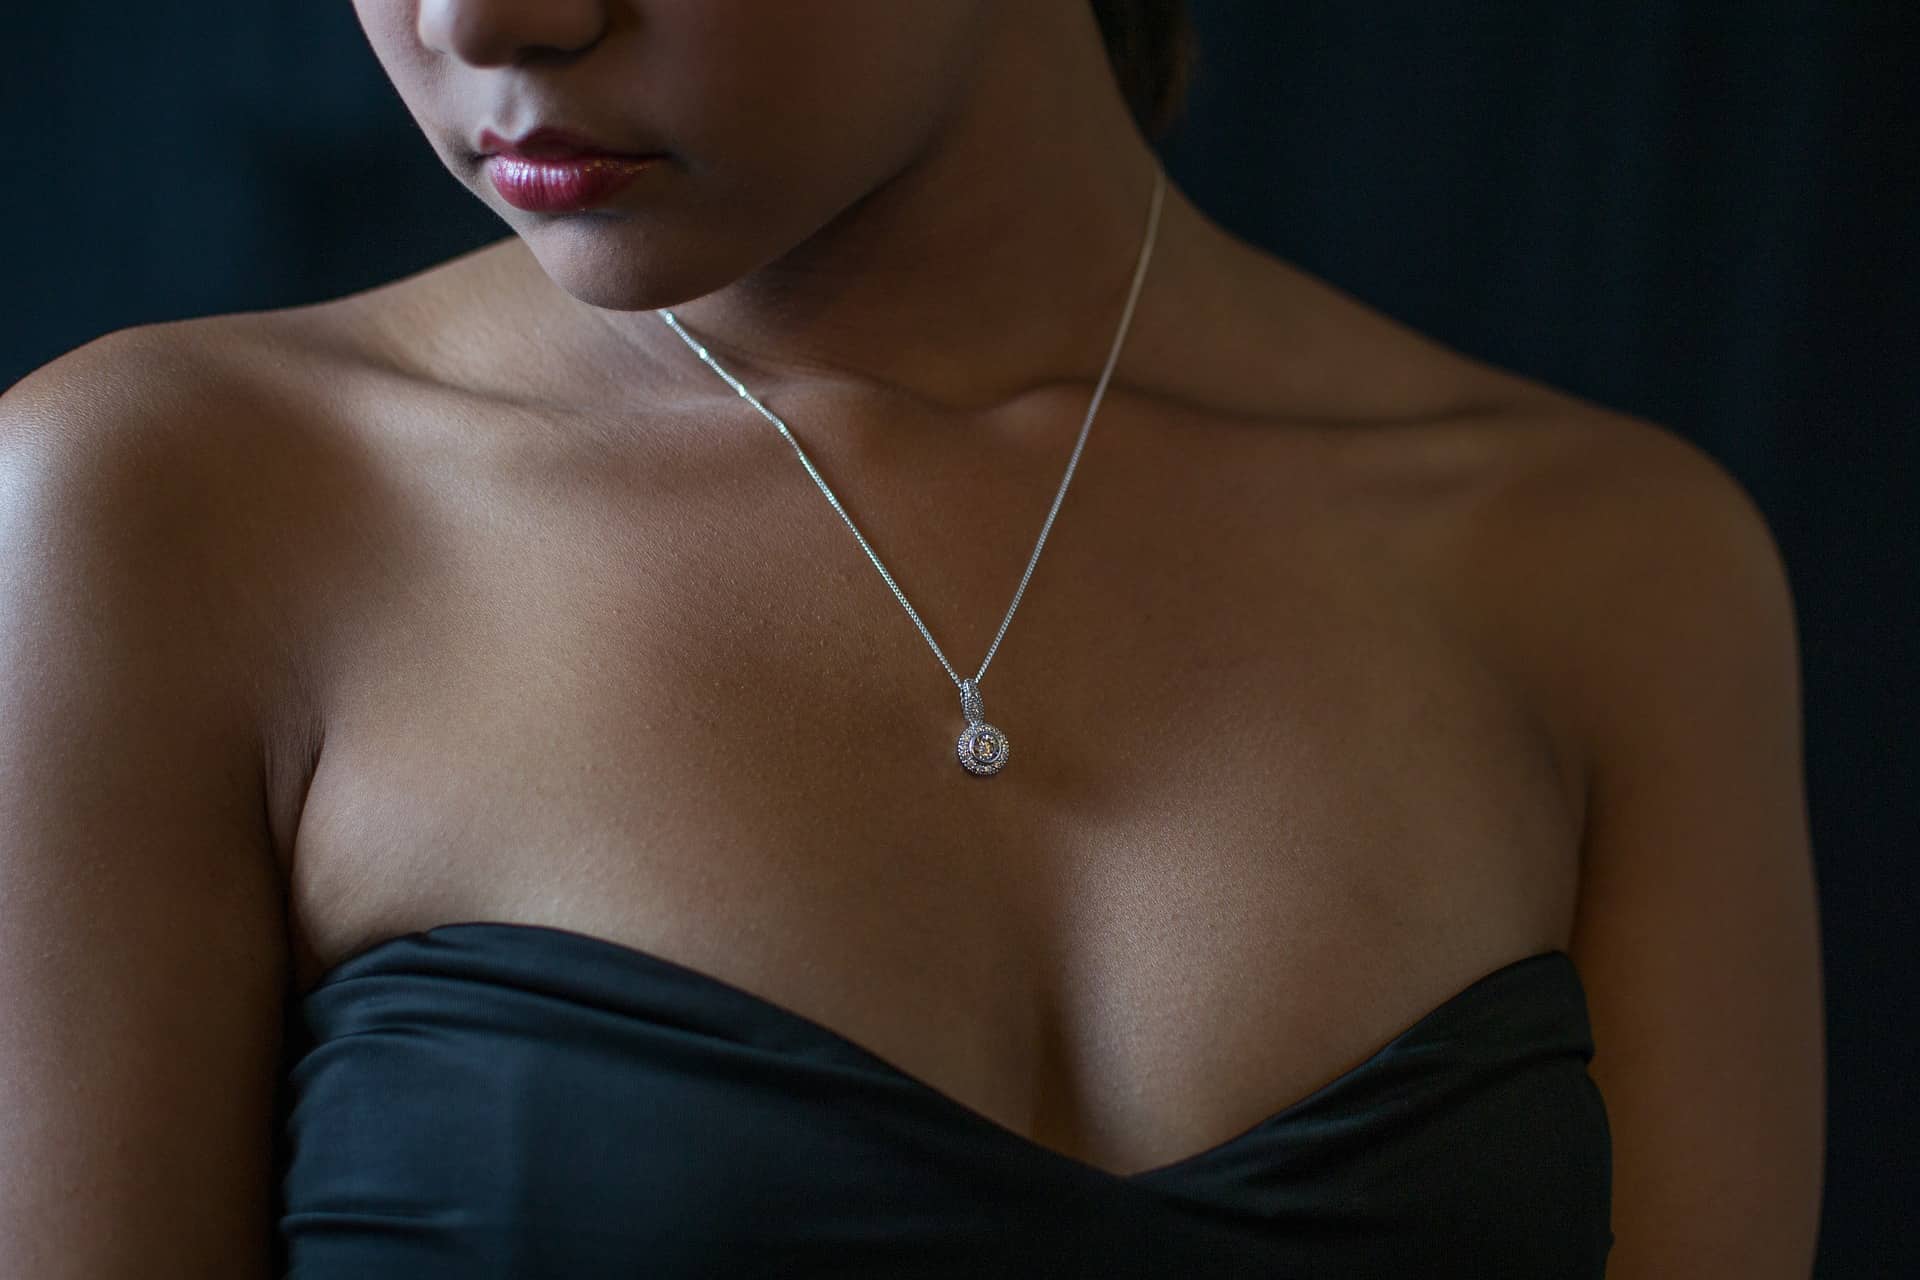 Woman Wearing a Black Dress With a Necklace